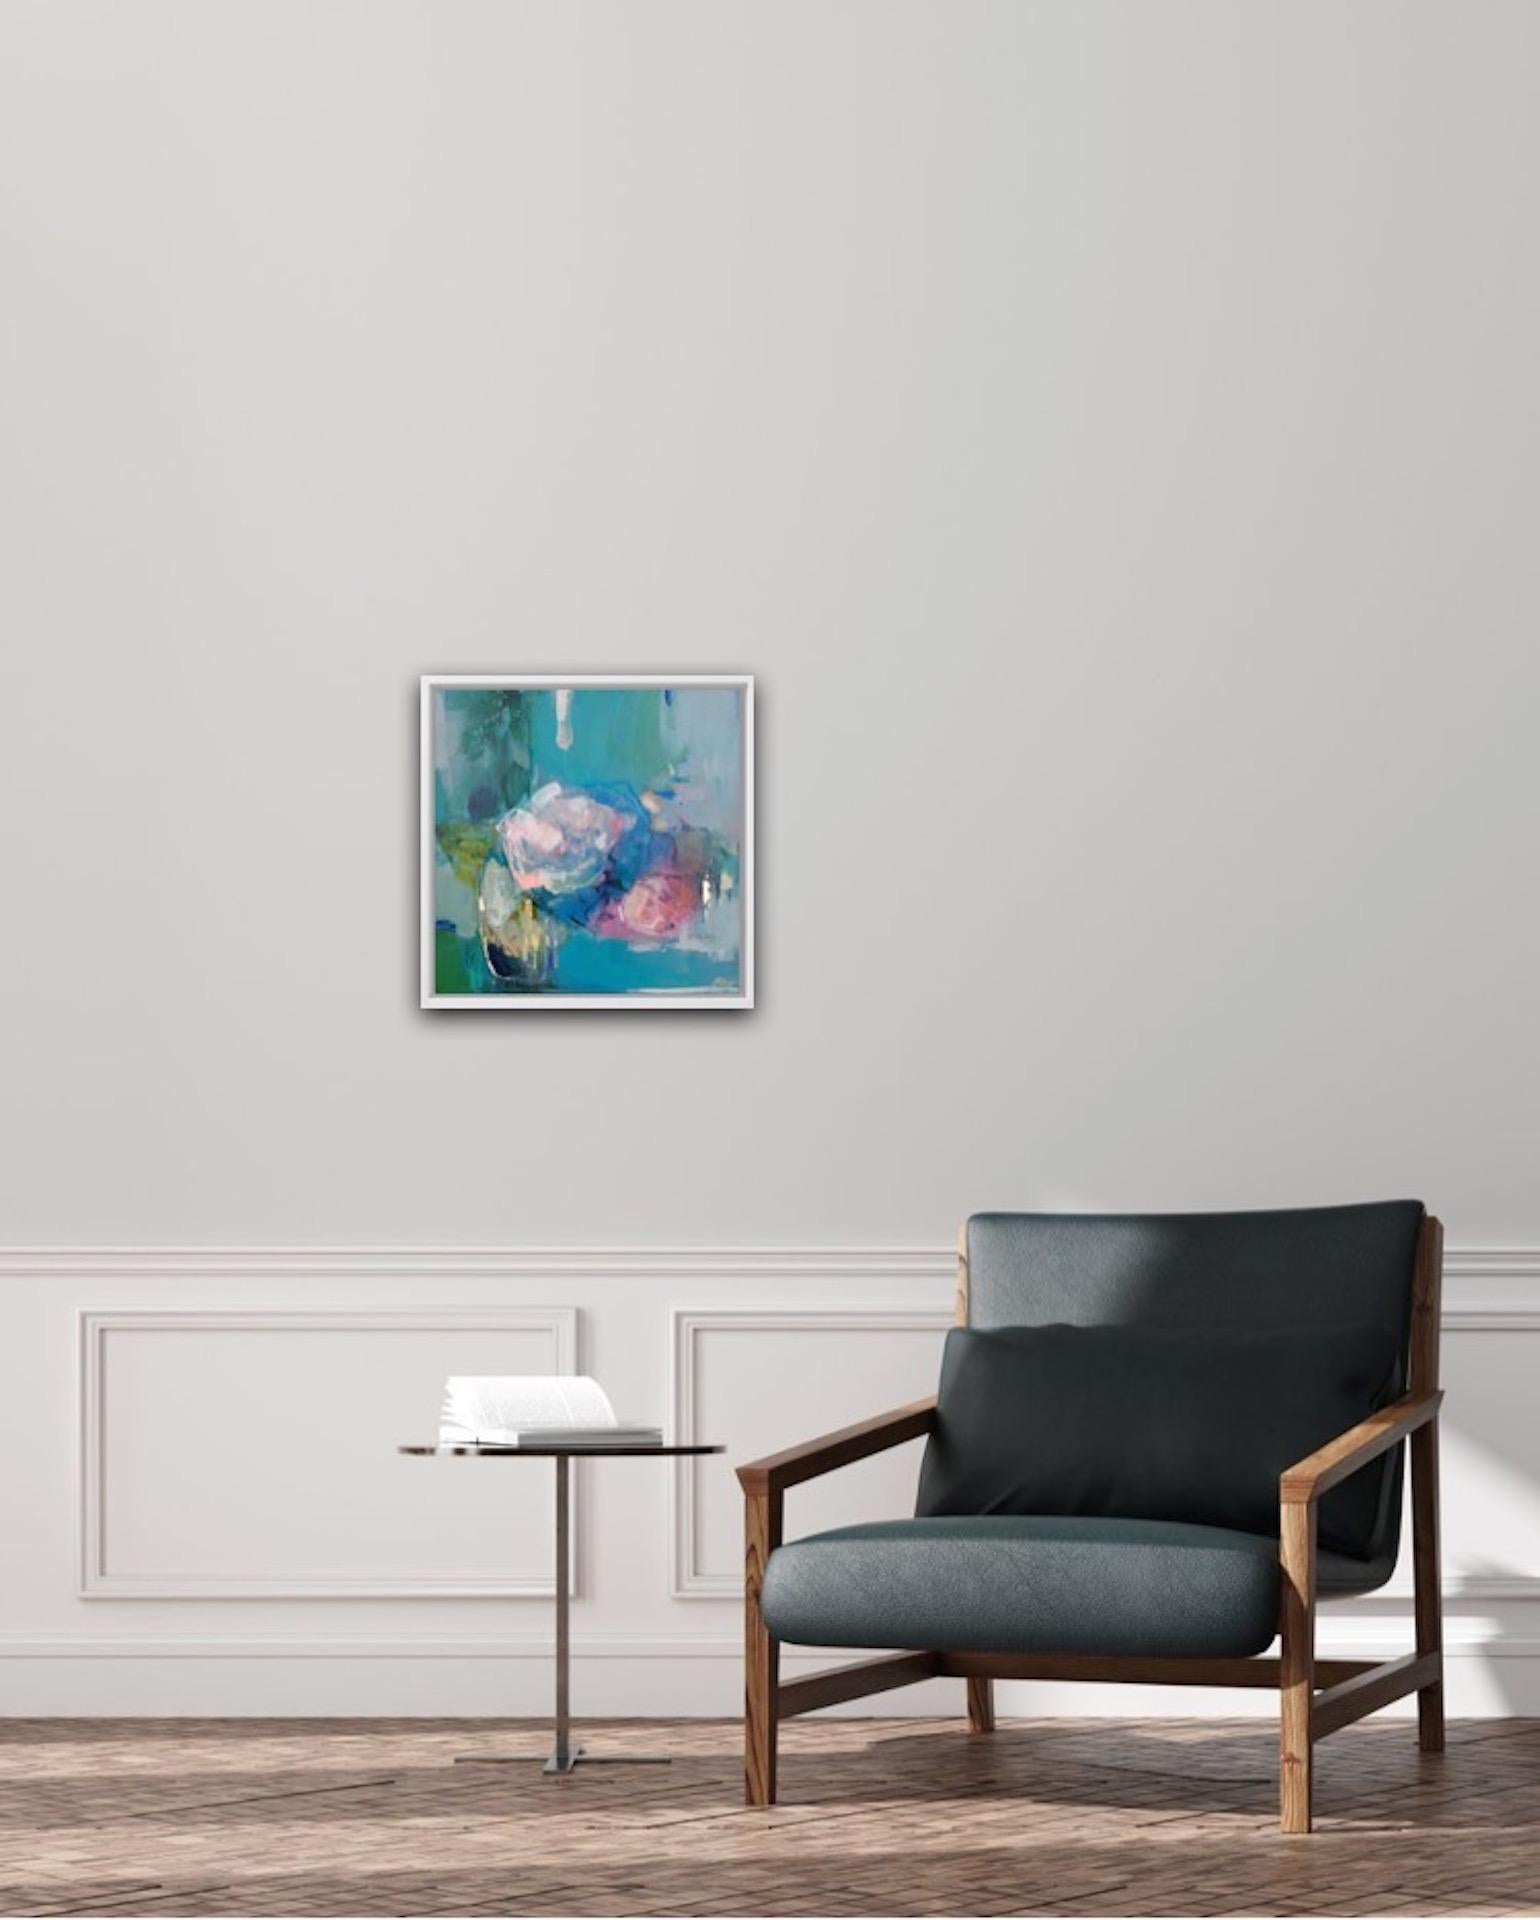 Magdalena Morey
Spring Blooms 2
Contemporary Still Life Painting
Mixed Media on Canvas
Canvas Size: H 30cm x W 30cm x D 3.5cm
Sold Unframed
(Please note that in situ images are purely an indication of how a piece may look.)

Spring Blooms 2 is an